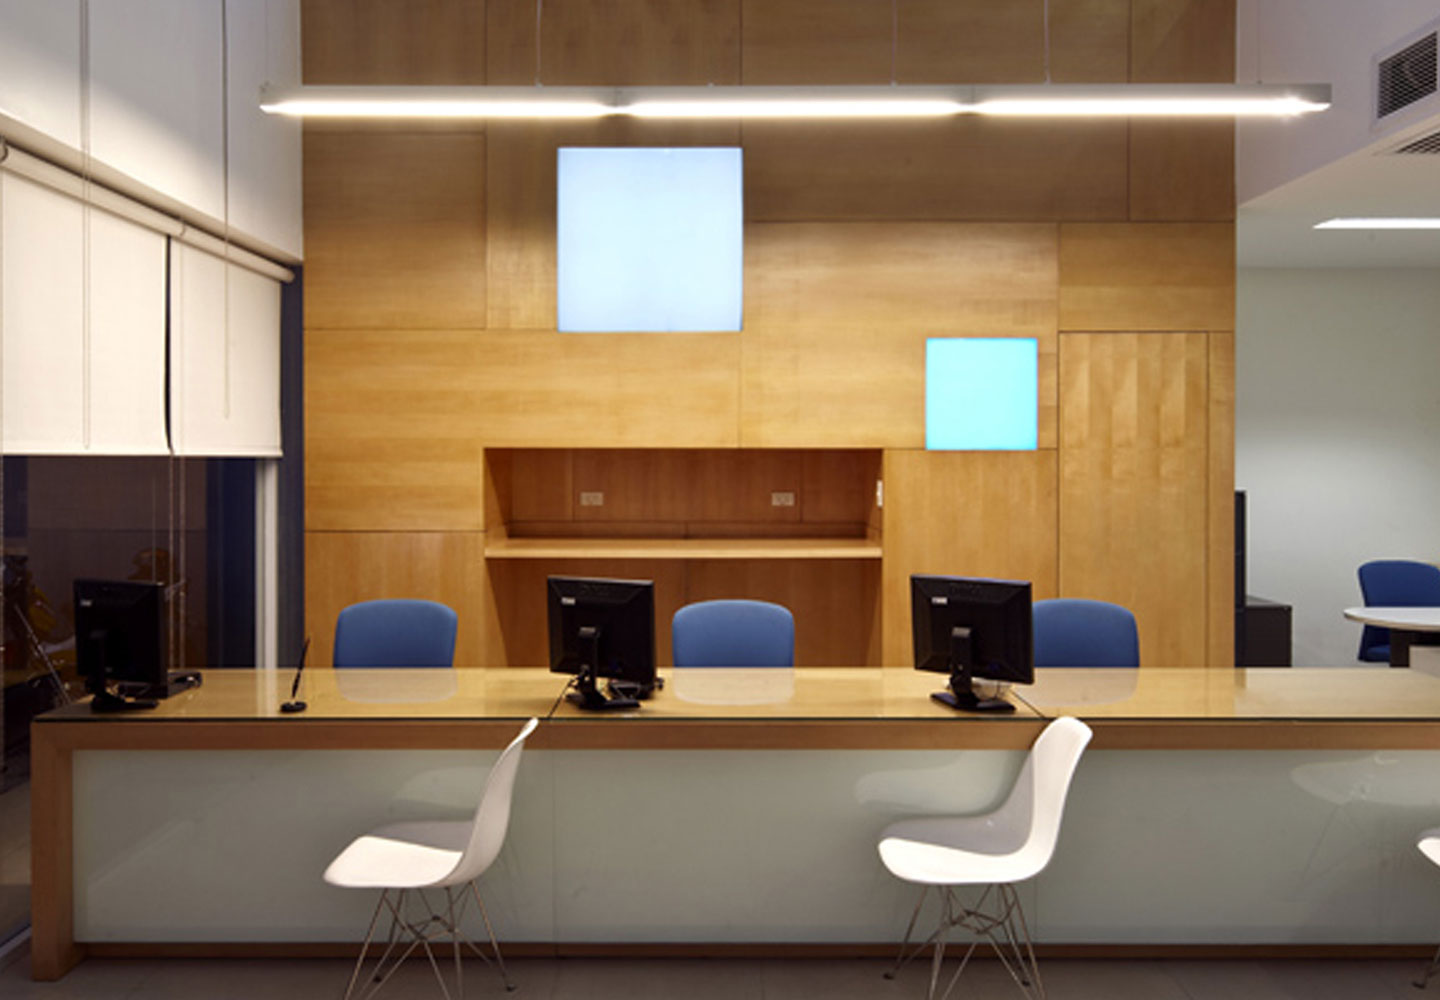 Brand Consultancy in Financial Services Industry. Office design for UCPB.